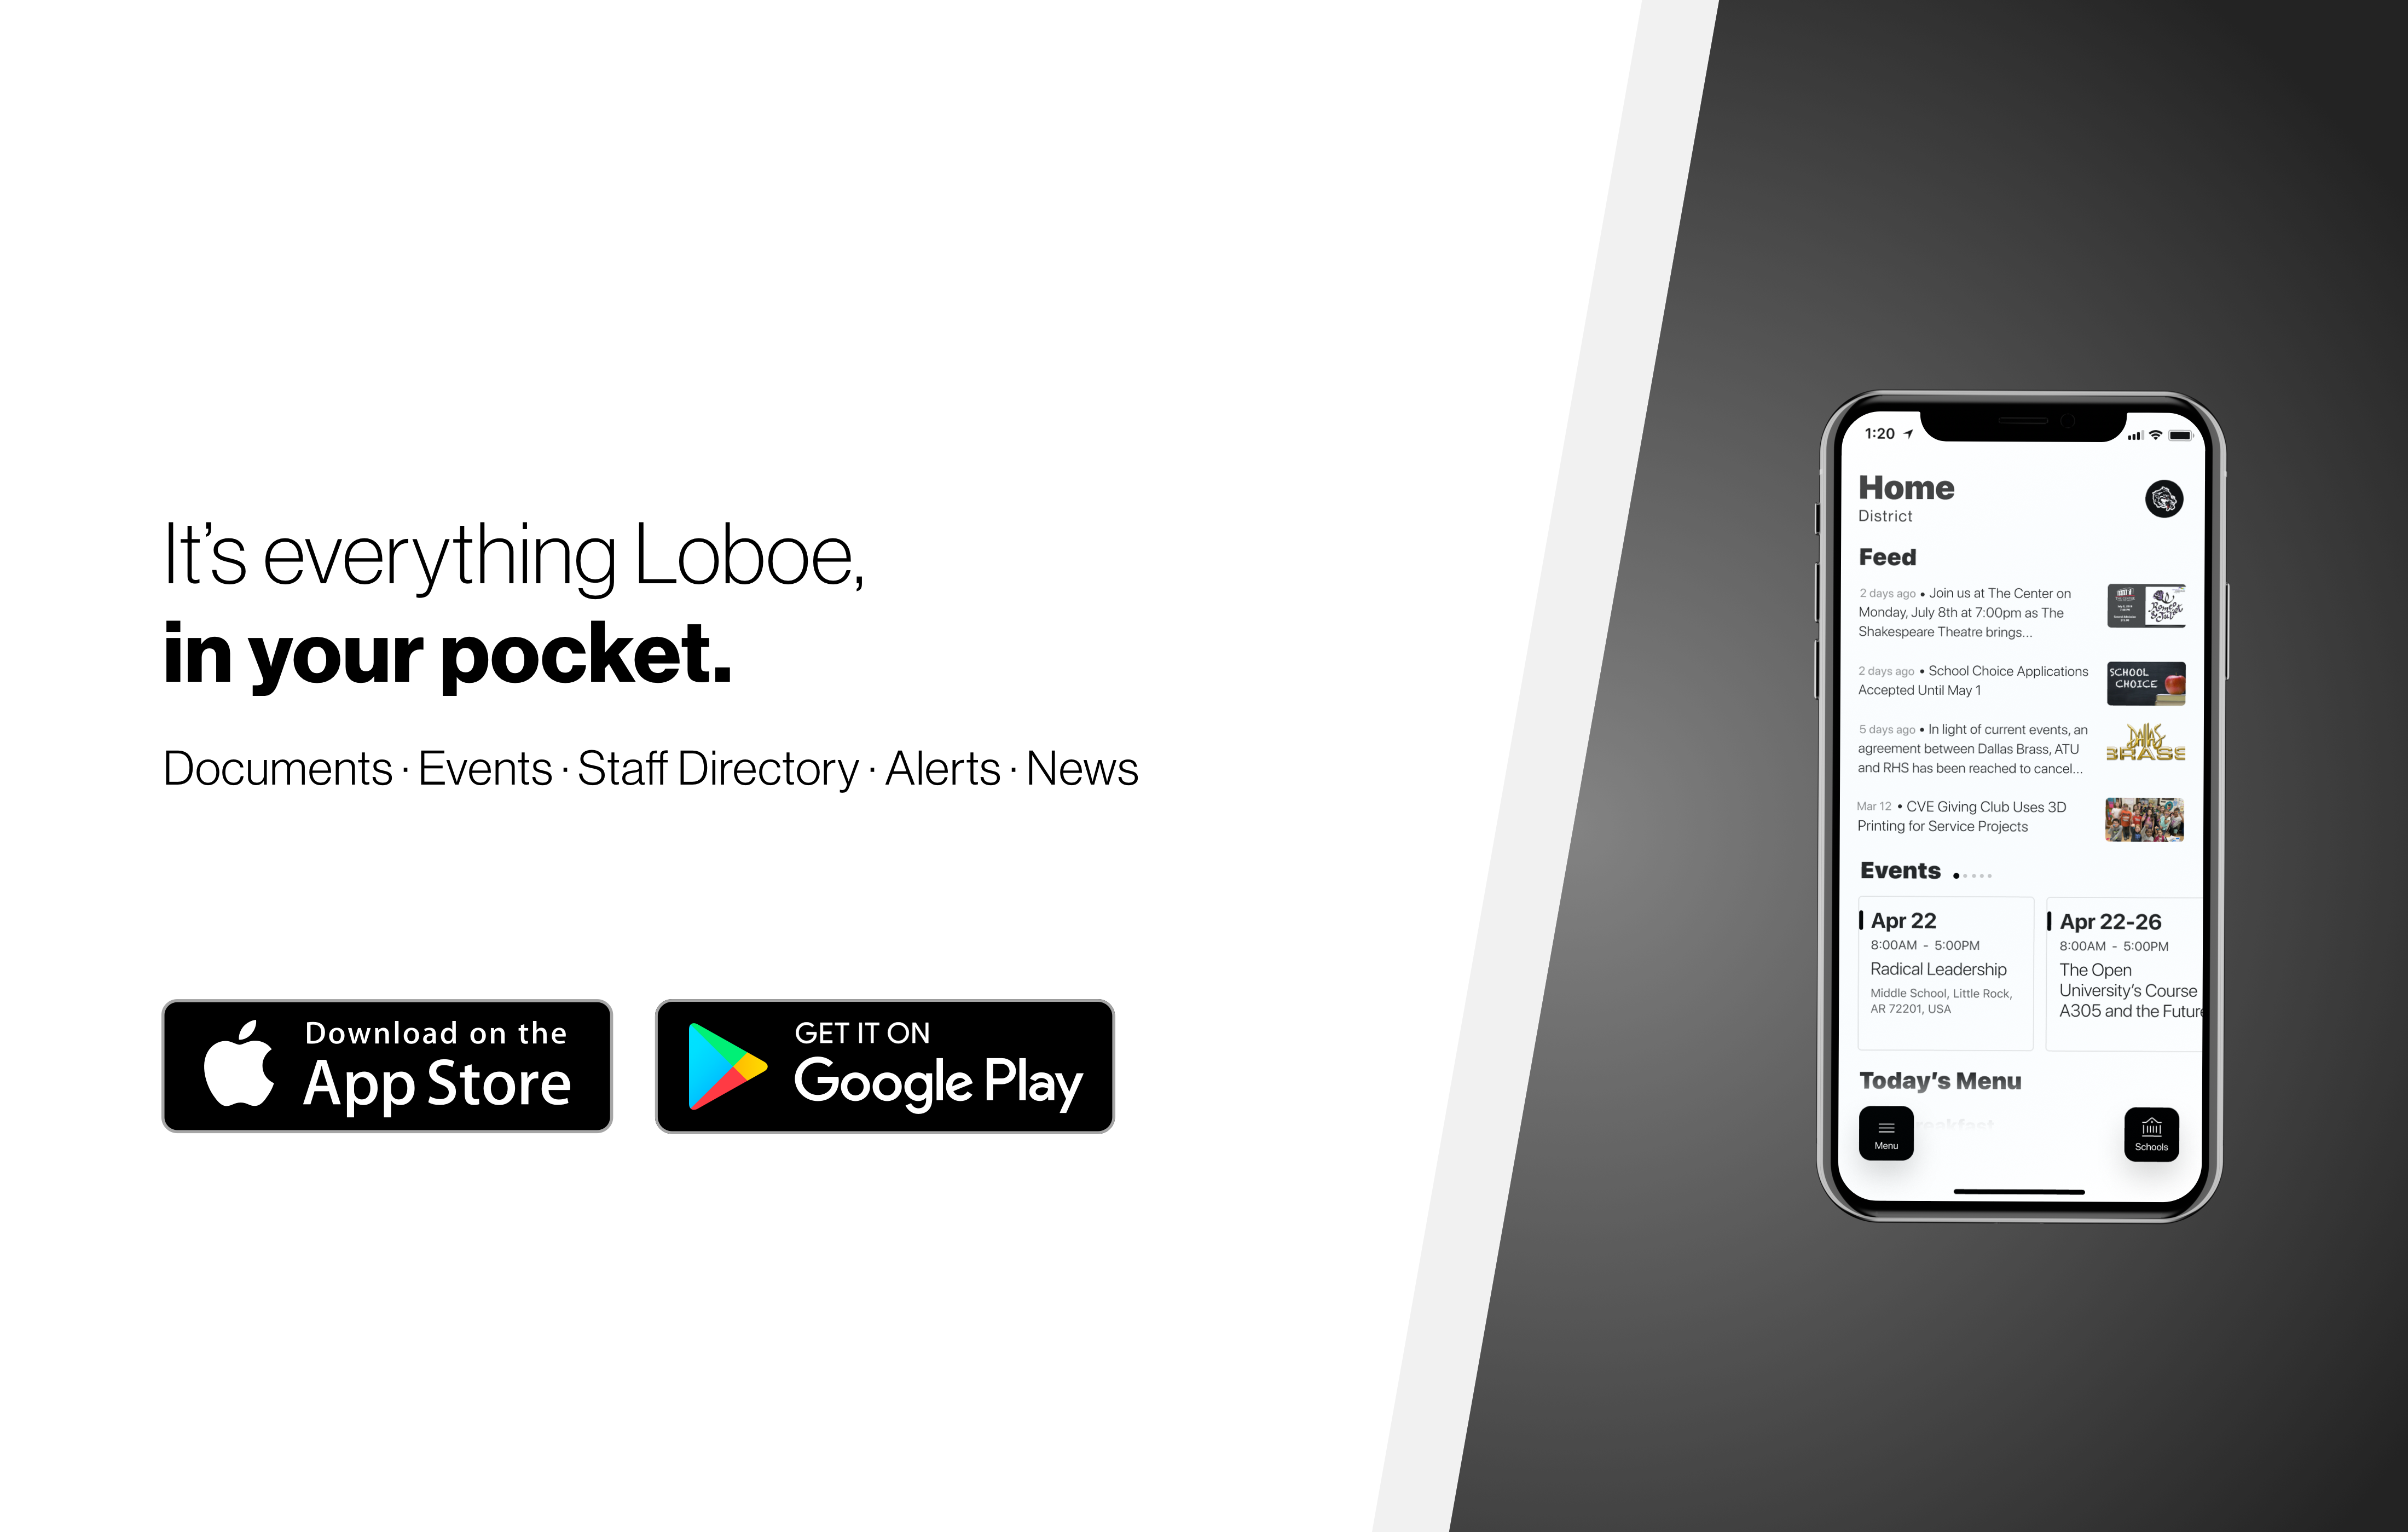 text: "Download our new app. Everything Lobo in your pocket"